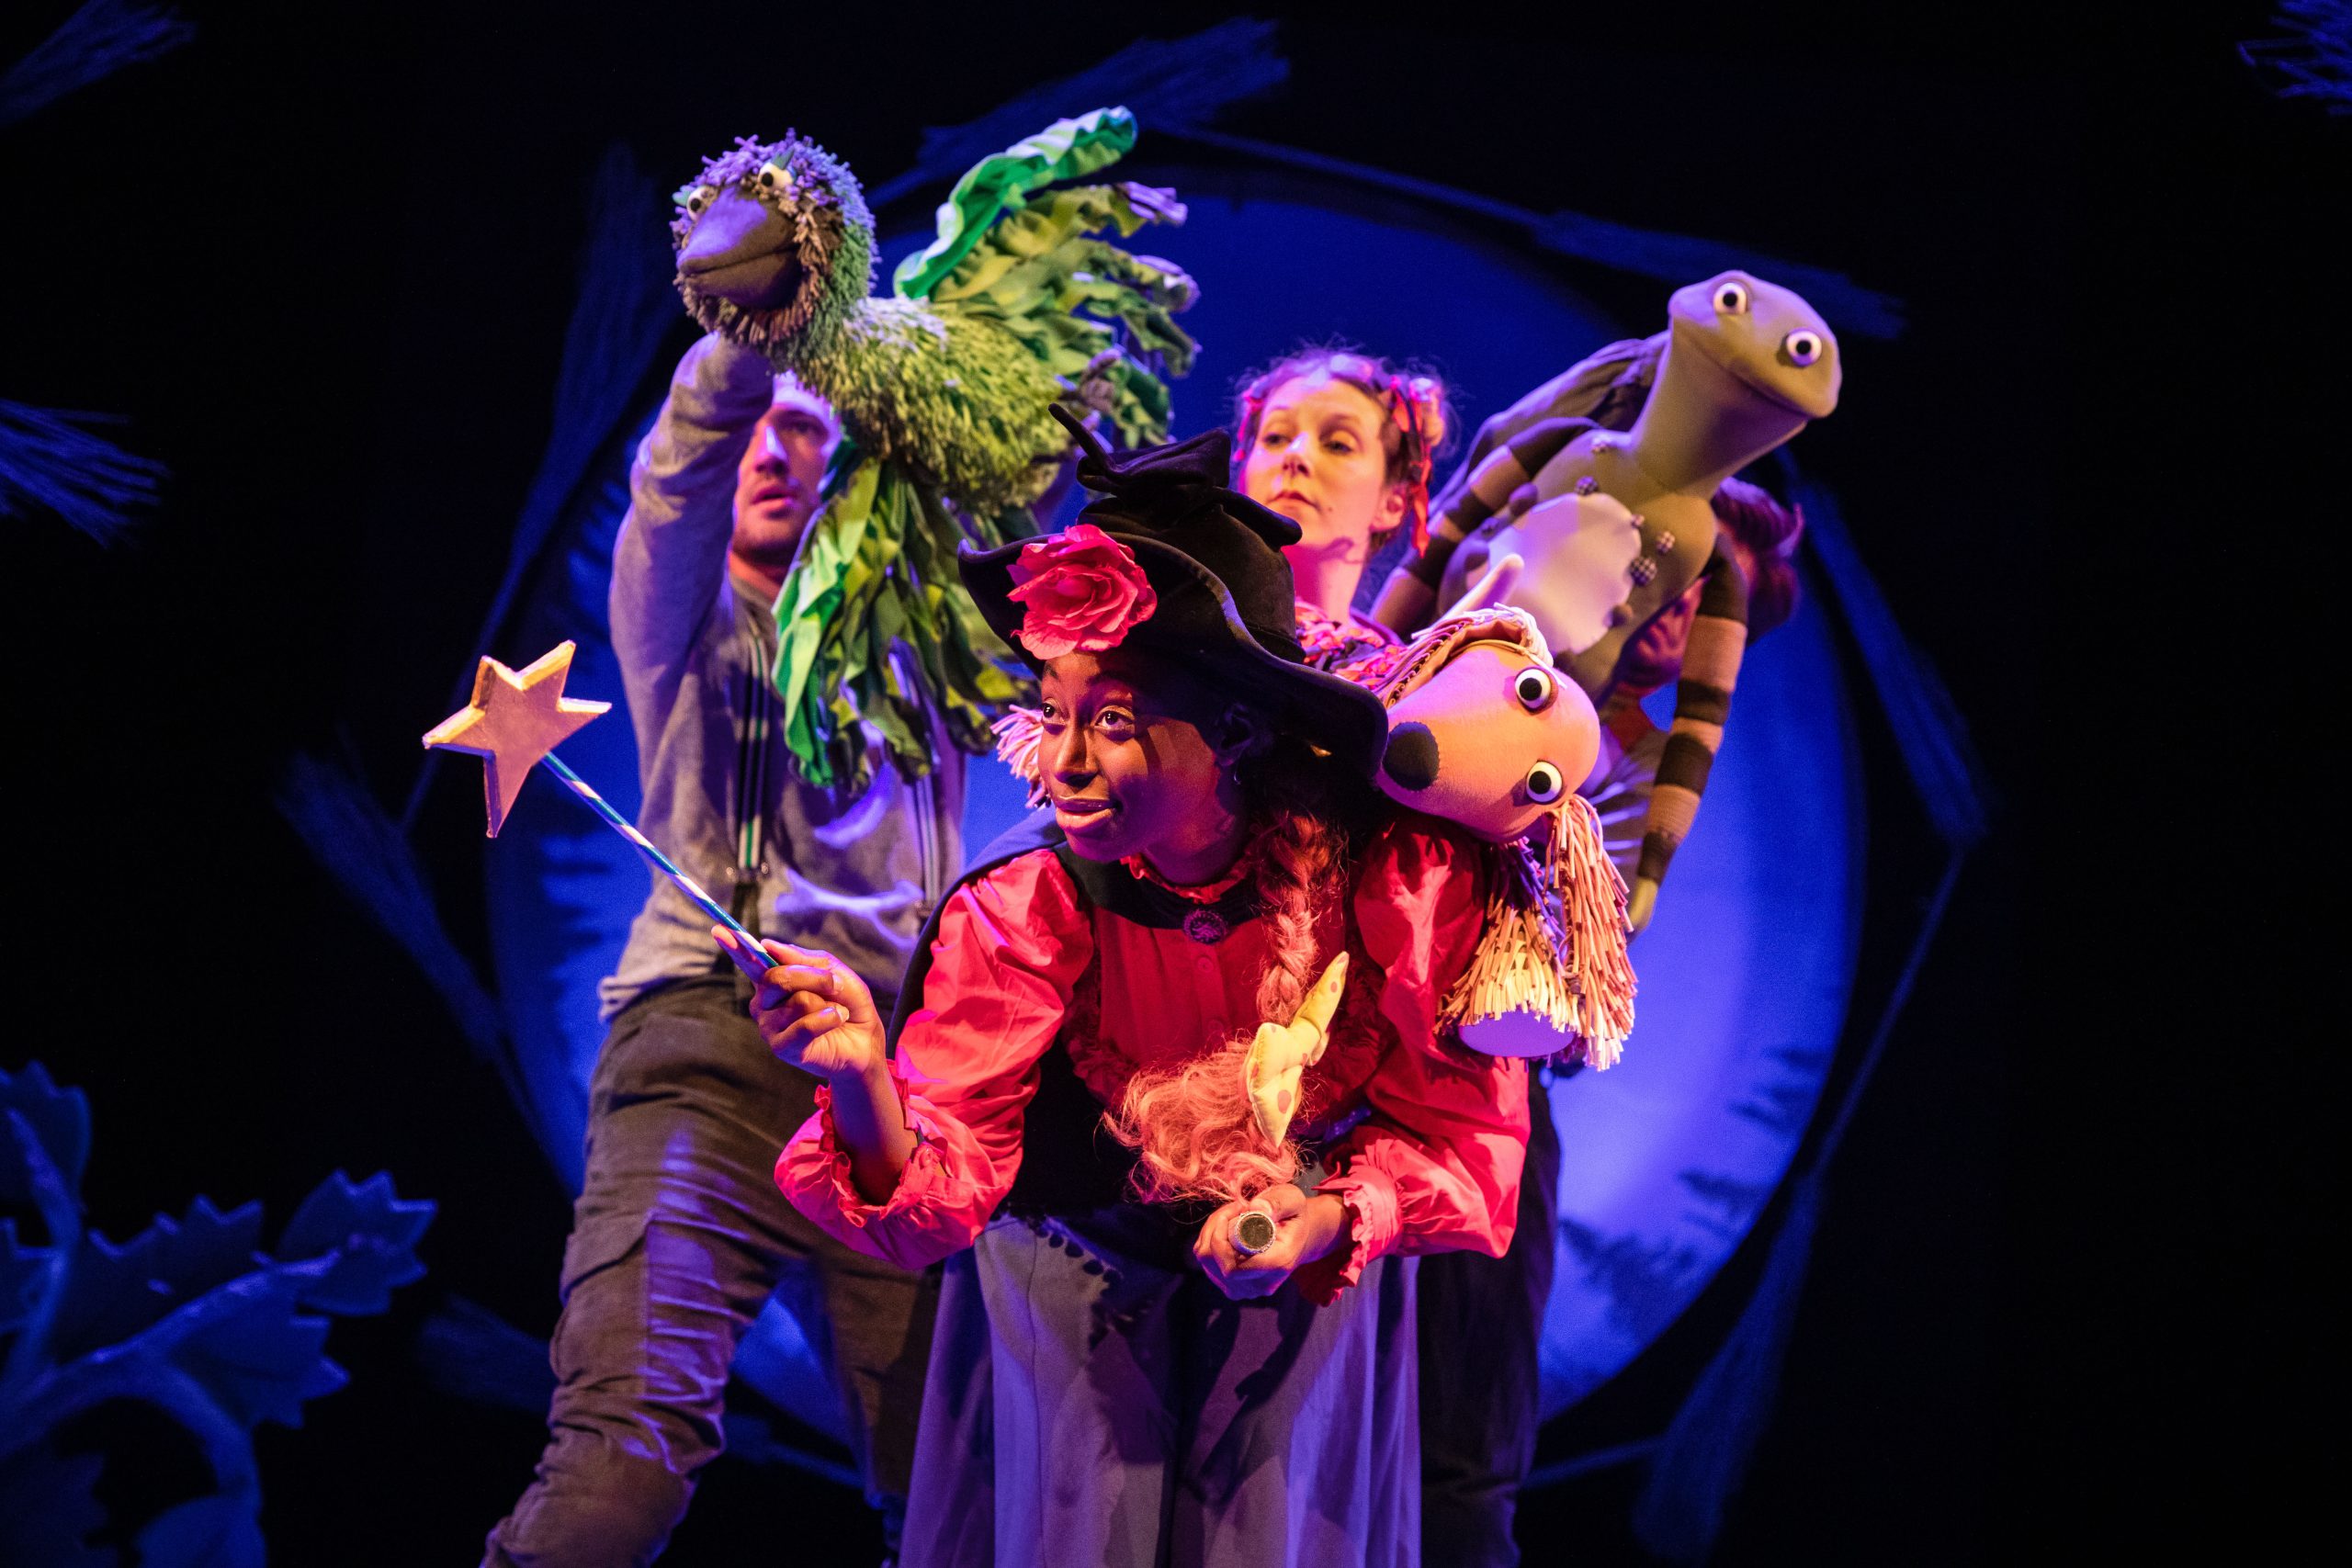 The witch wearing a black hat and a red blouse holding a magic wand with a star on the end. The hat has a pink flower on and she has a yellow spotty bow in her hair. A dog puppet is on her left shoulder and a frog puppet is peeping over him. The green bird puppet is flying over her right shoulder, controlled by a puppeteer dressed in grey. An actress with blonde hair has her head popping out above the witch's hat.